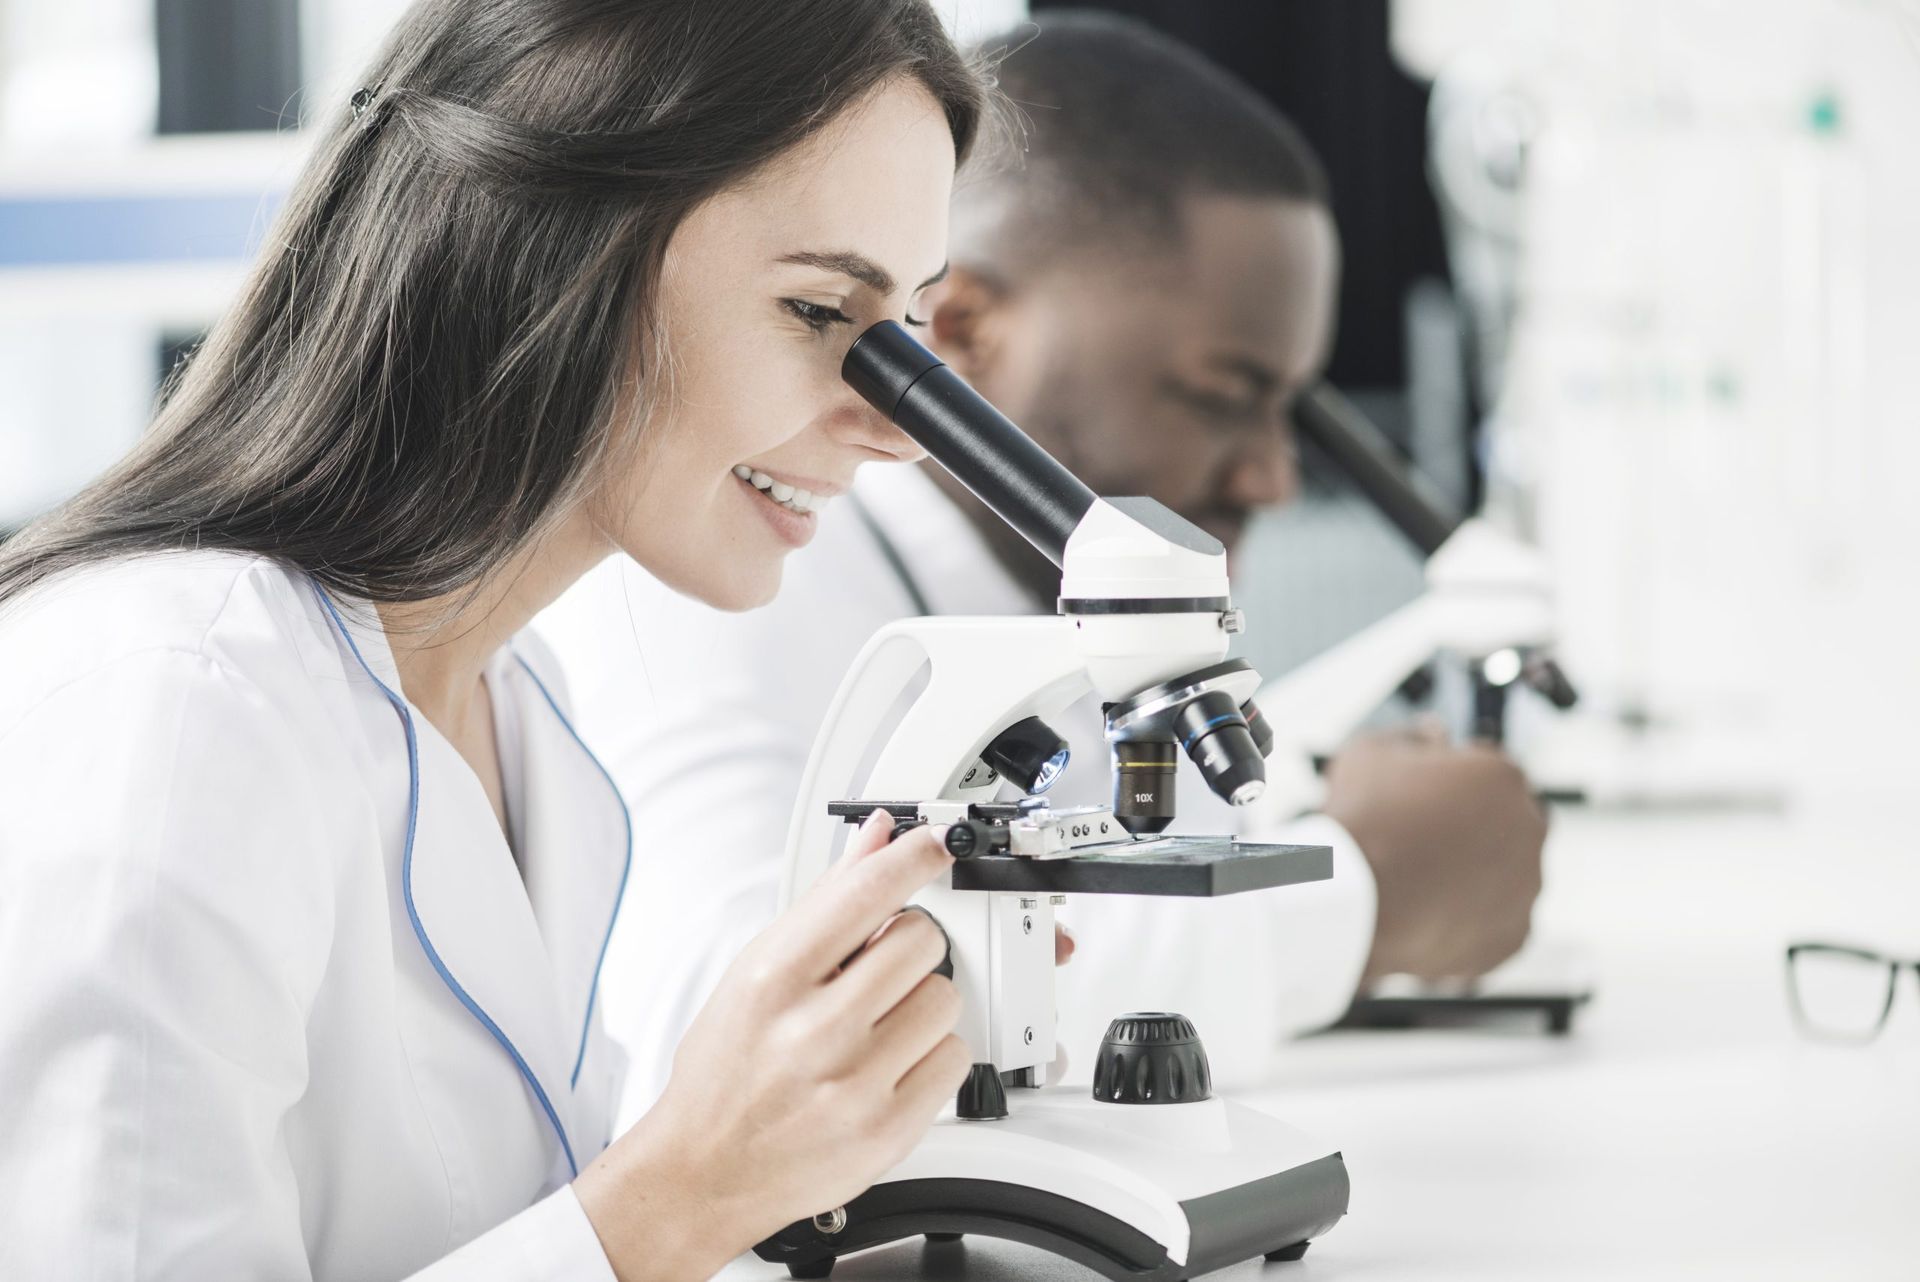 A woman is looking through a microscope in a laboratory.